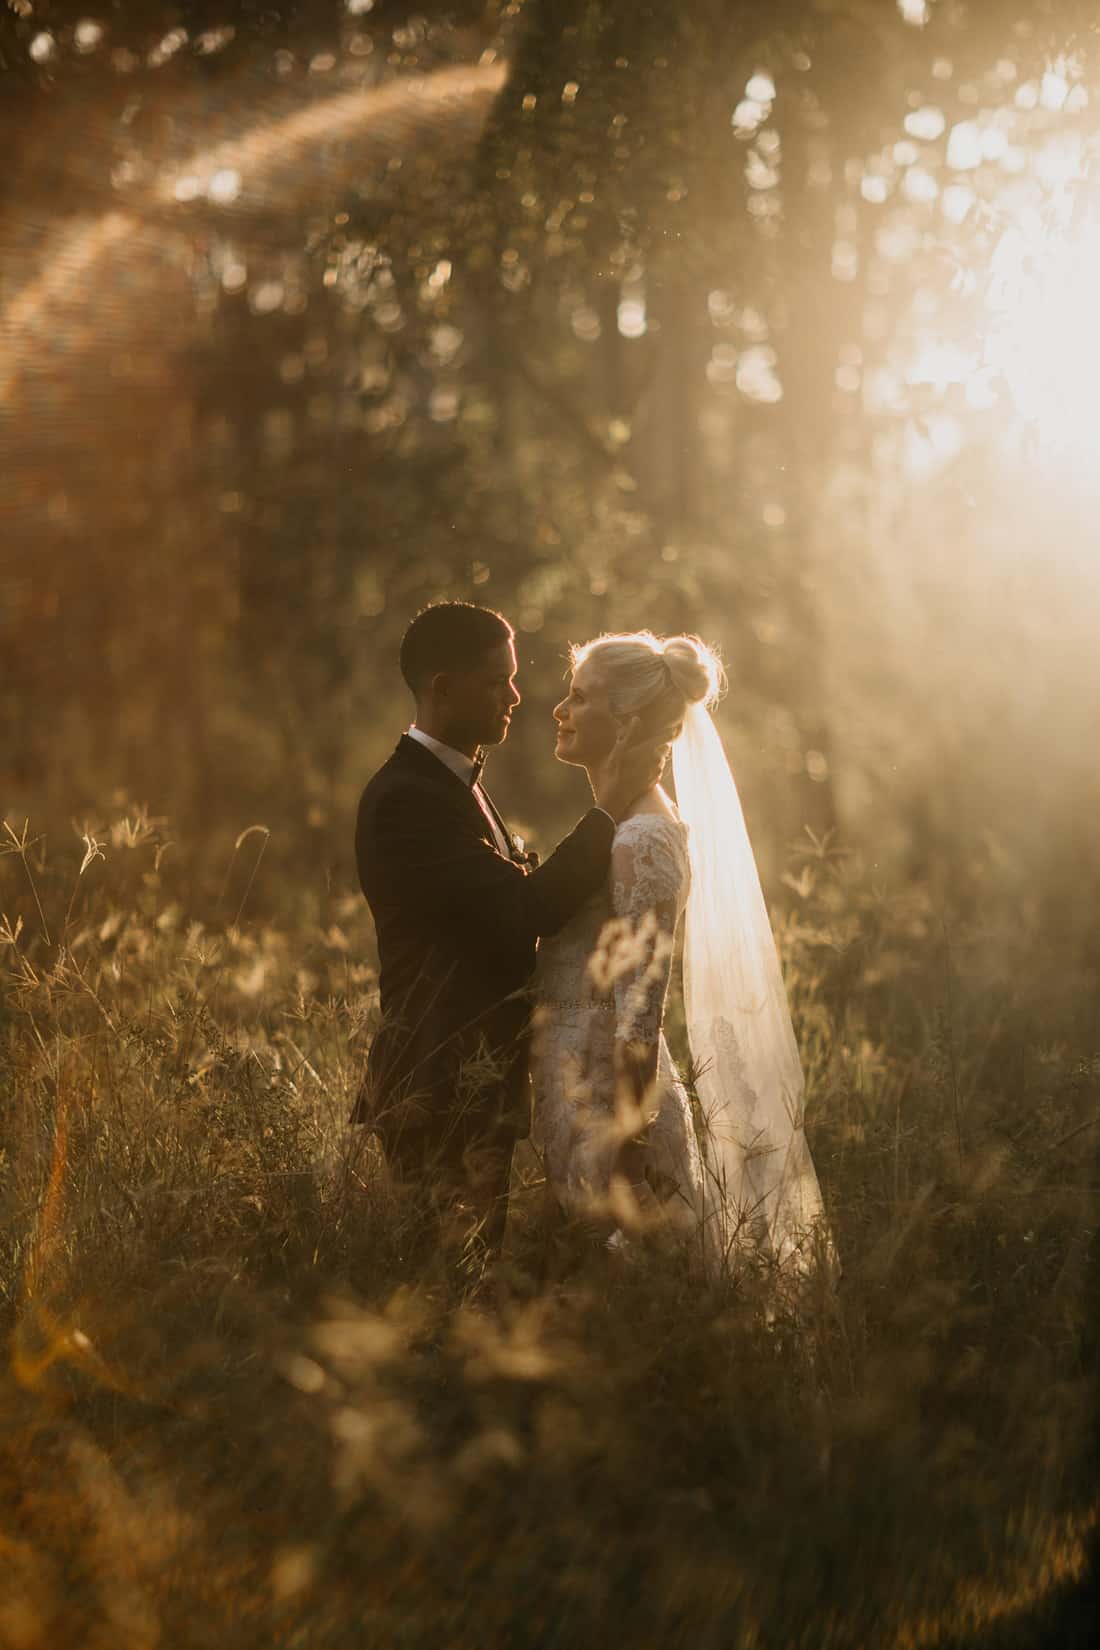 Natural wedding photography by Michael Gray